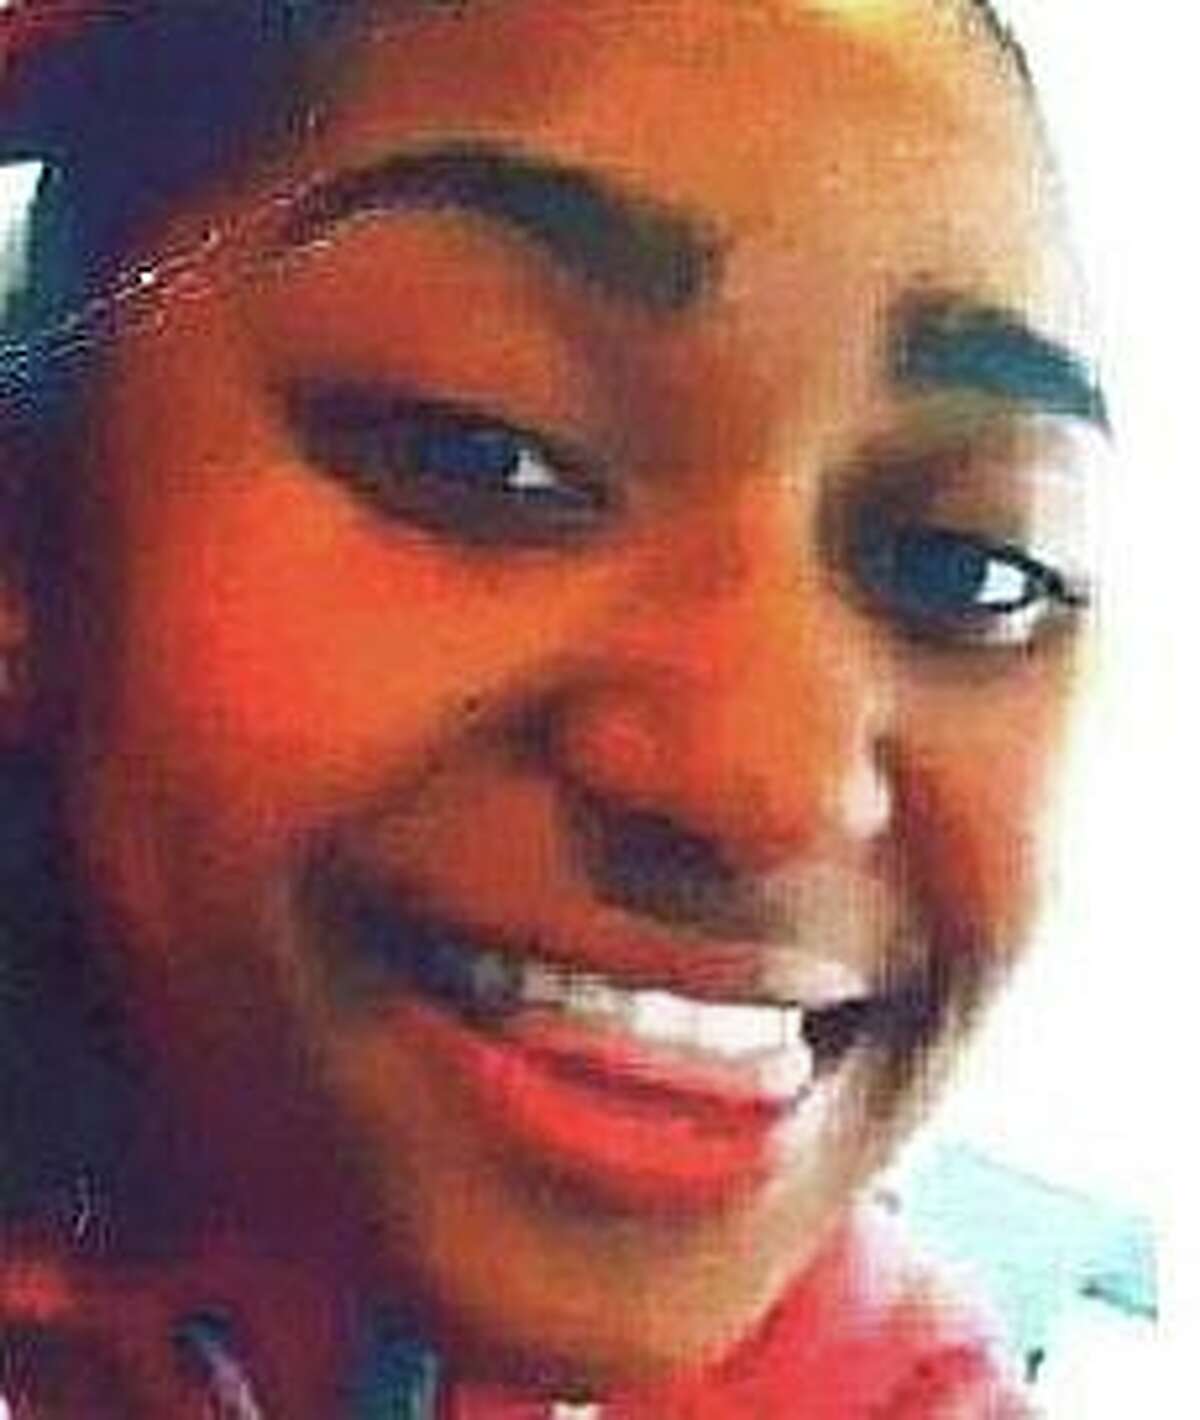 Samia Ramos, 16, was described in a Silver Alert as an endangered runaway who has been missing from Bridgeport, Conn., since Jan. 20, 2021.